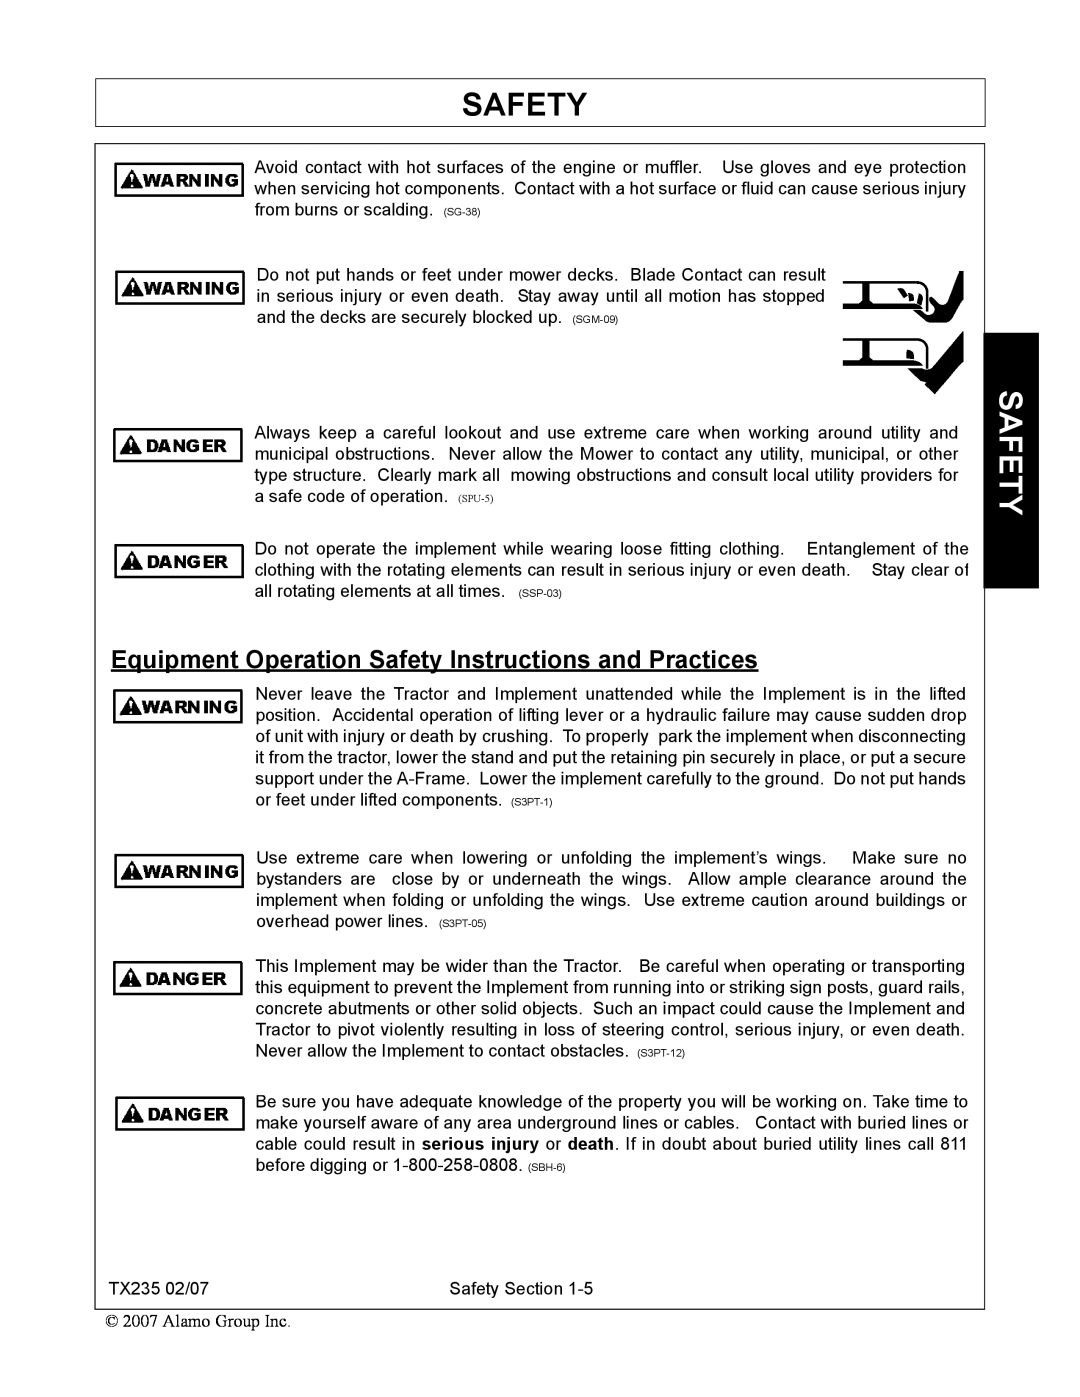 Alamo TX235 manual Equipment Operation Safety Instructions and Practices 